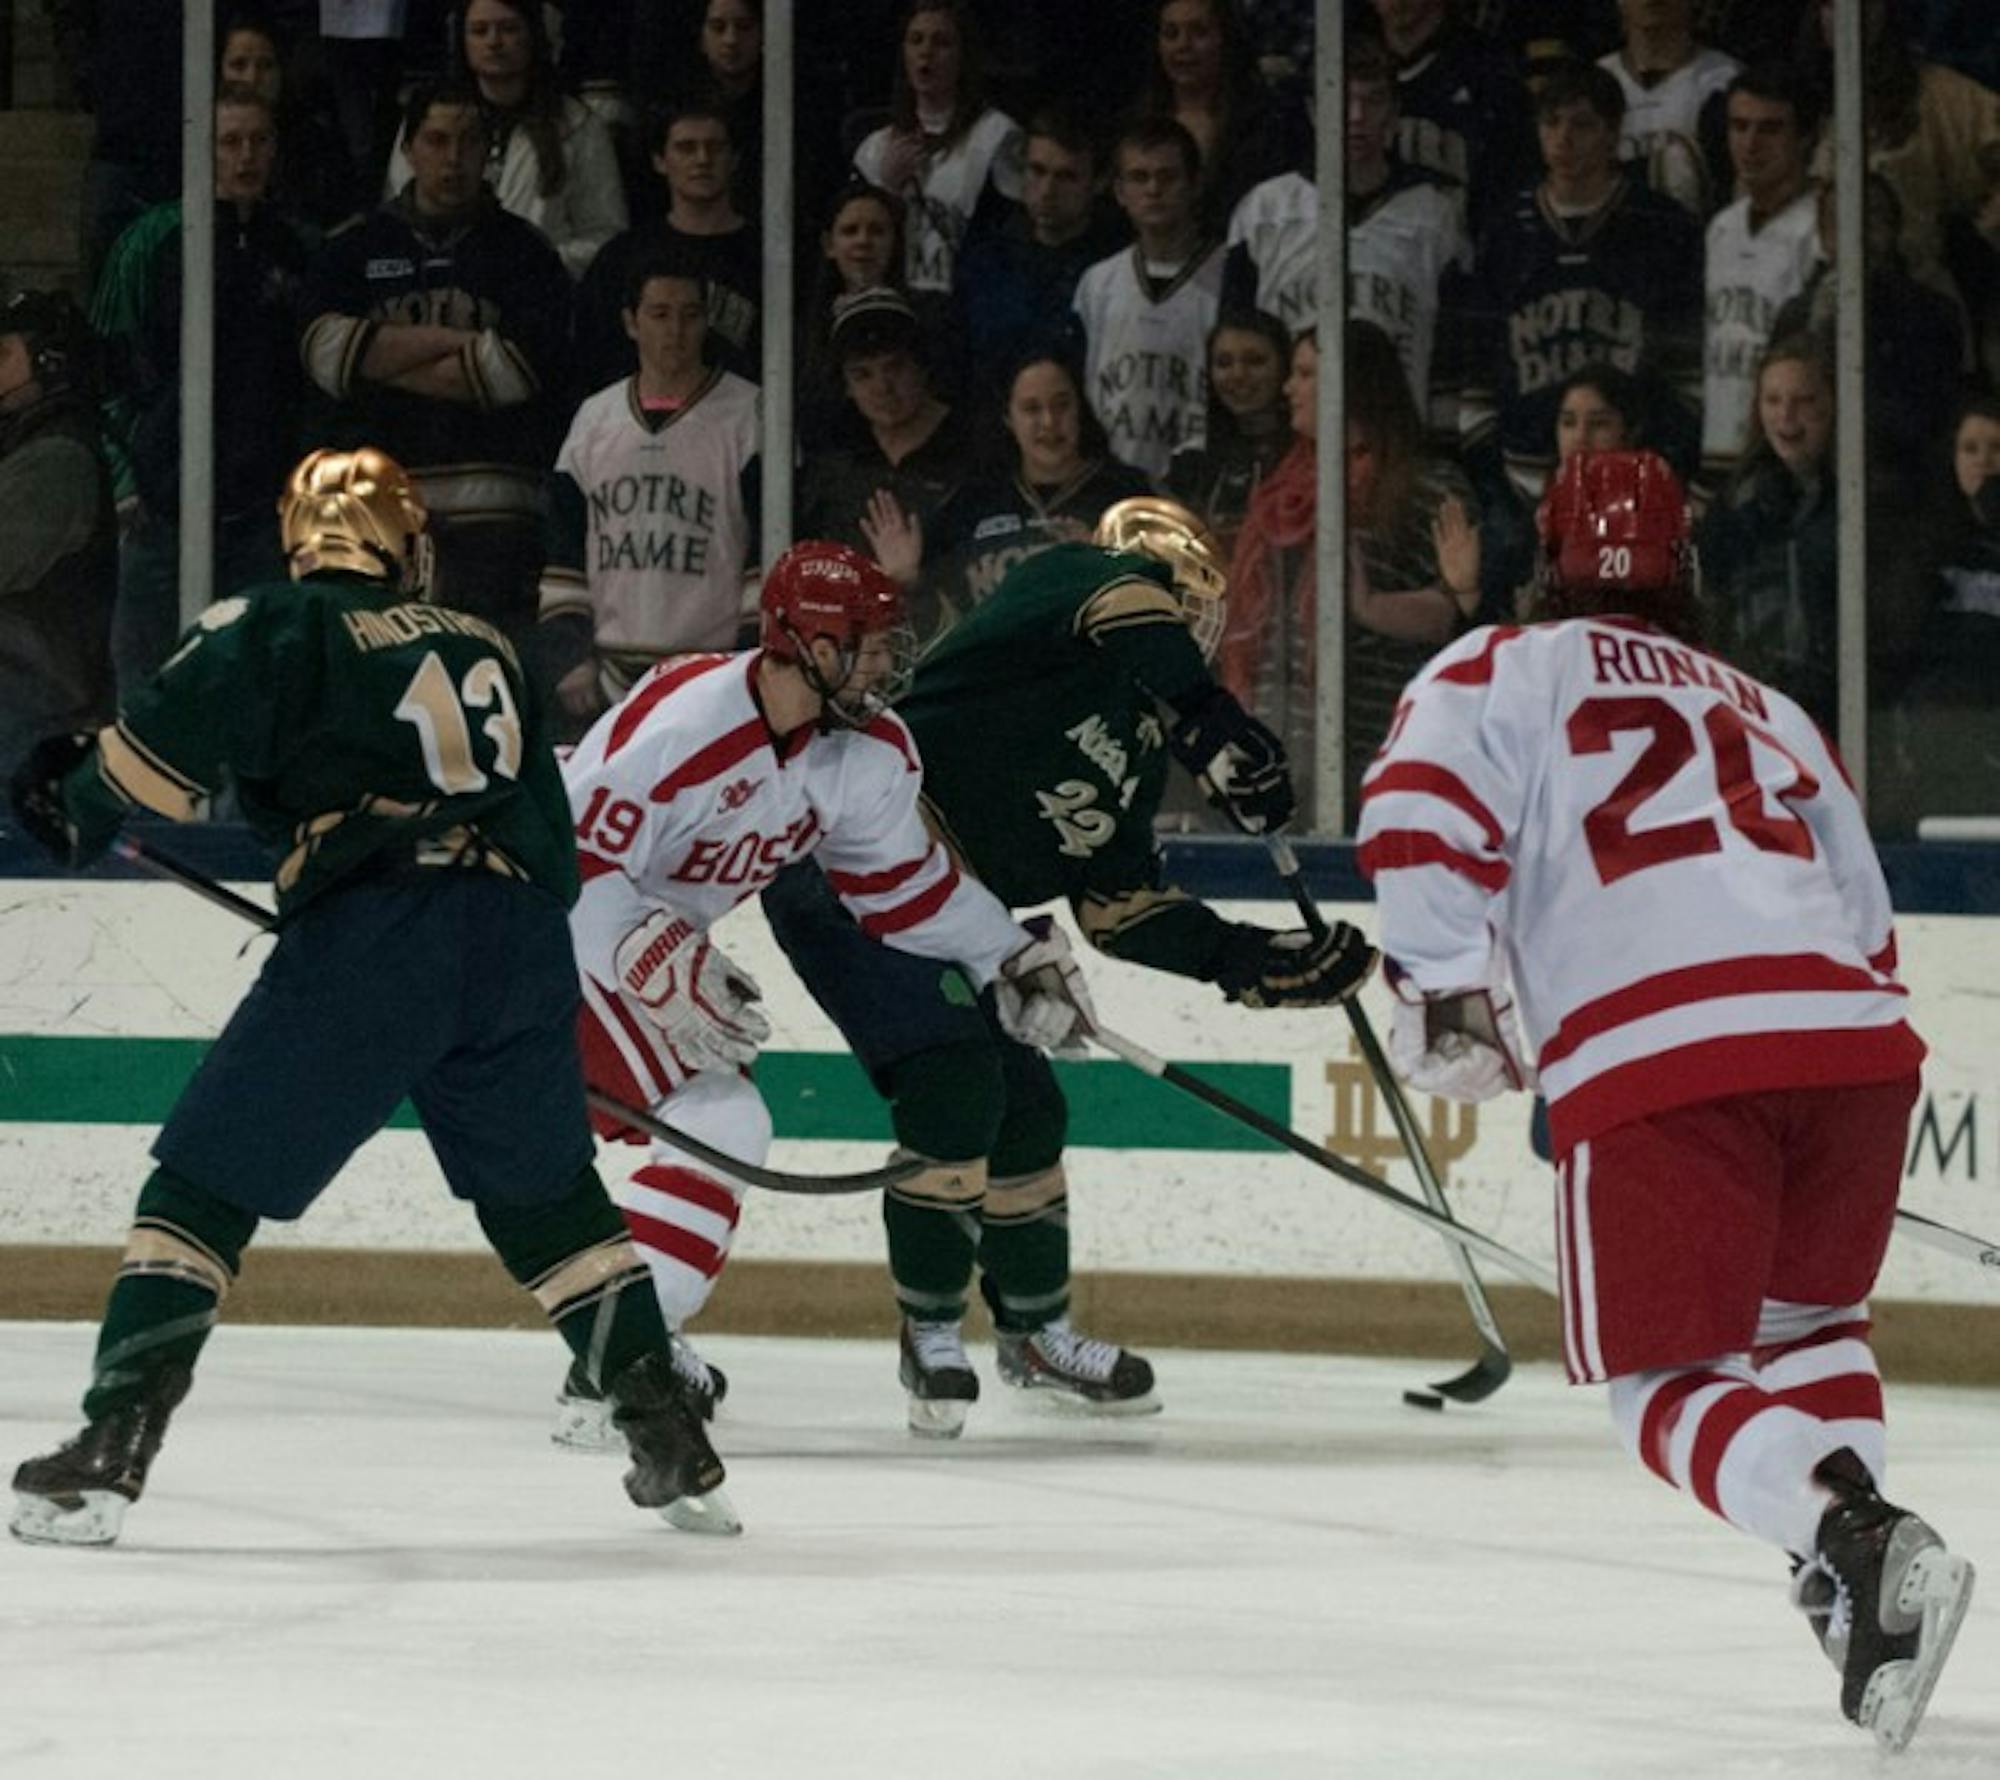 Irish sophomore wing Mario Lucia corrals the puck along the boards during Notre Dame’s 2-0 victory over Boston University on Feb. 22.